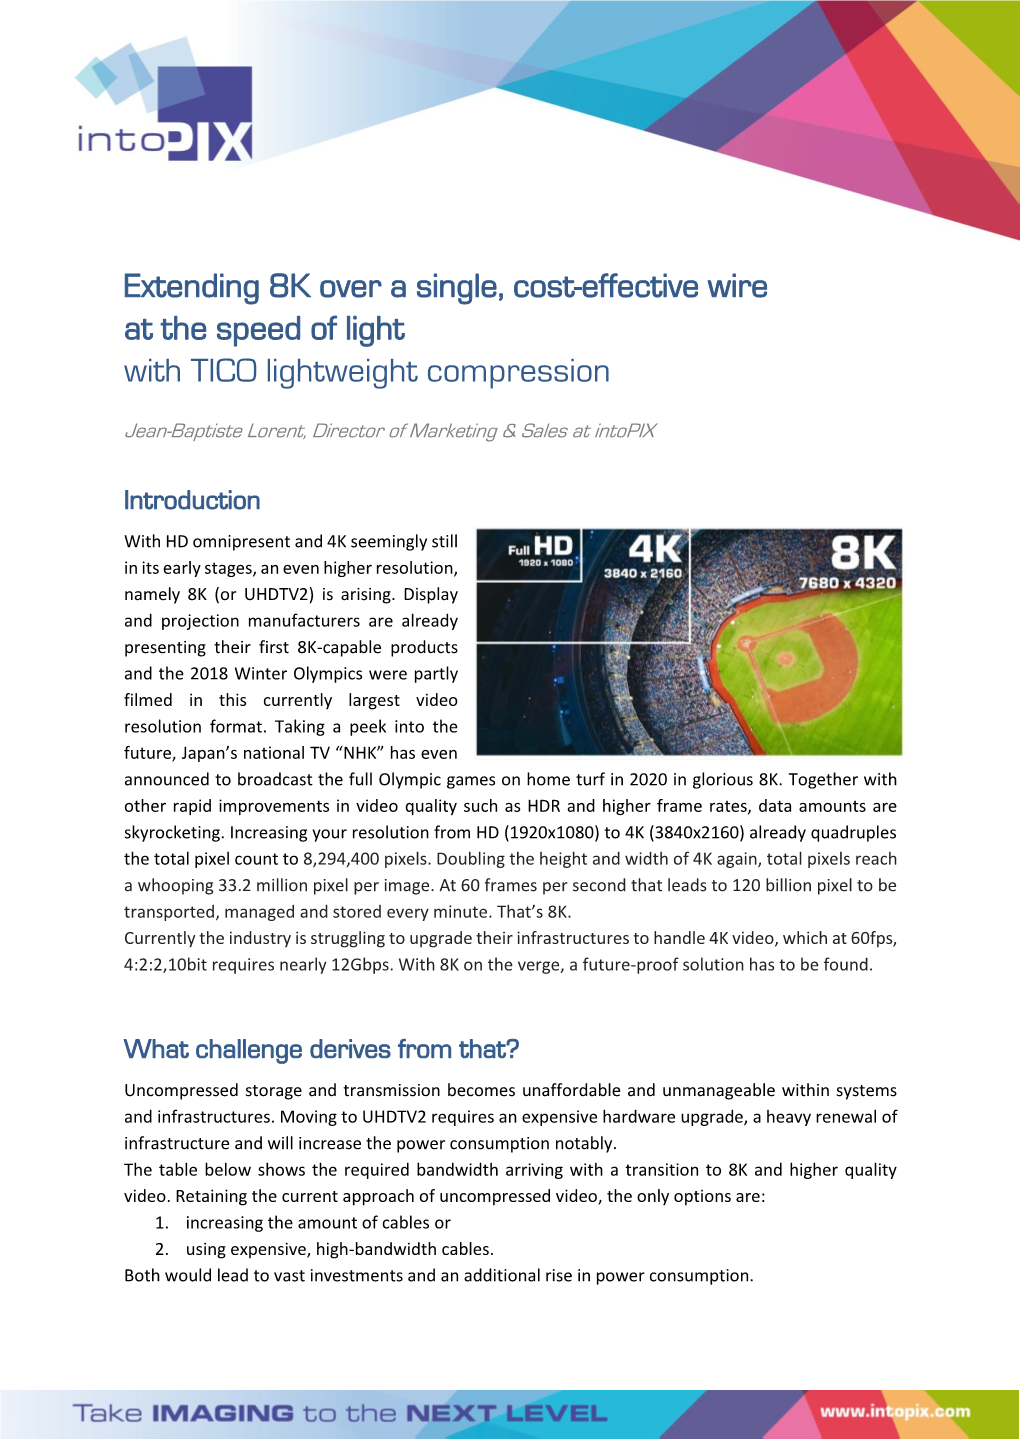 Extending 8K Over a Single, Cost-Effective Wire at the Speed of Light with TICO Lightweight Compression